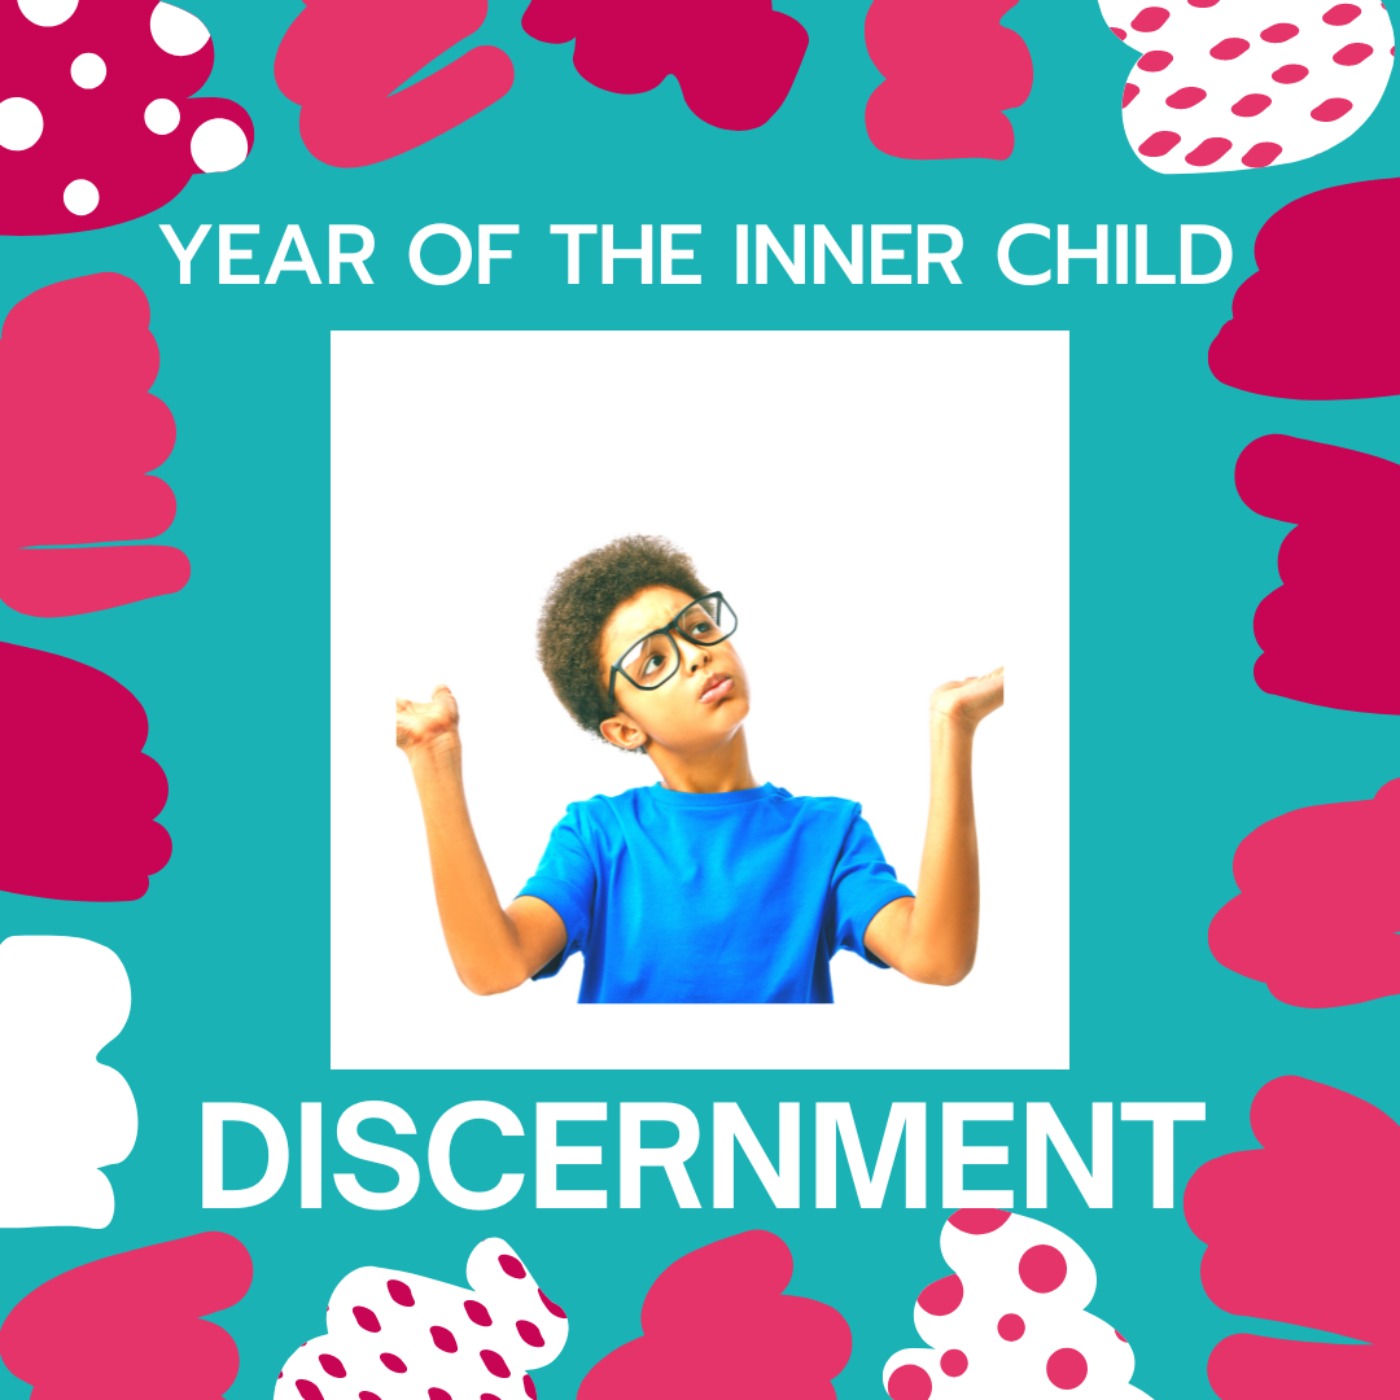 Year of the Inner Child: Discernment